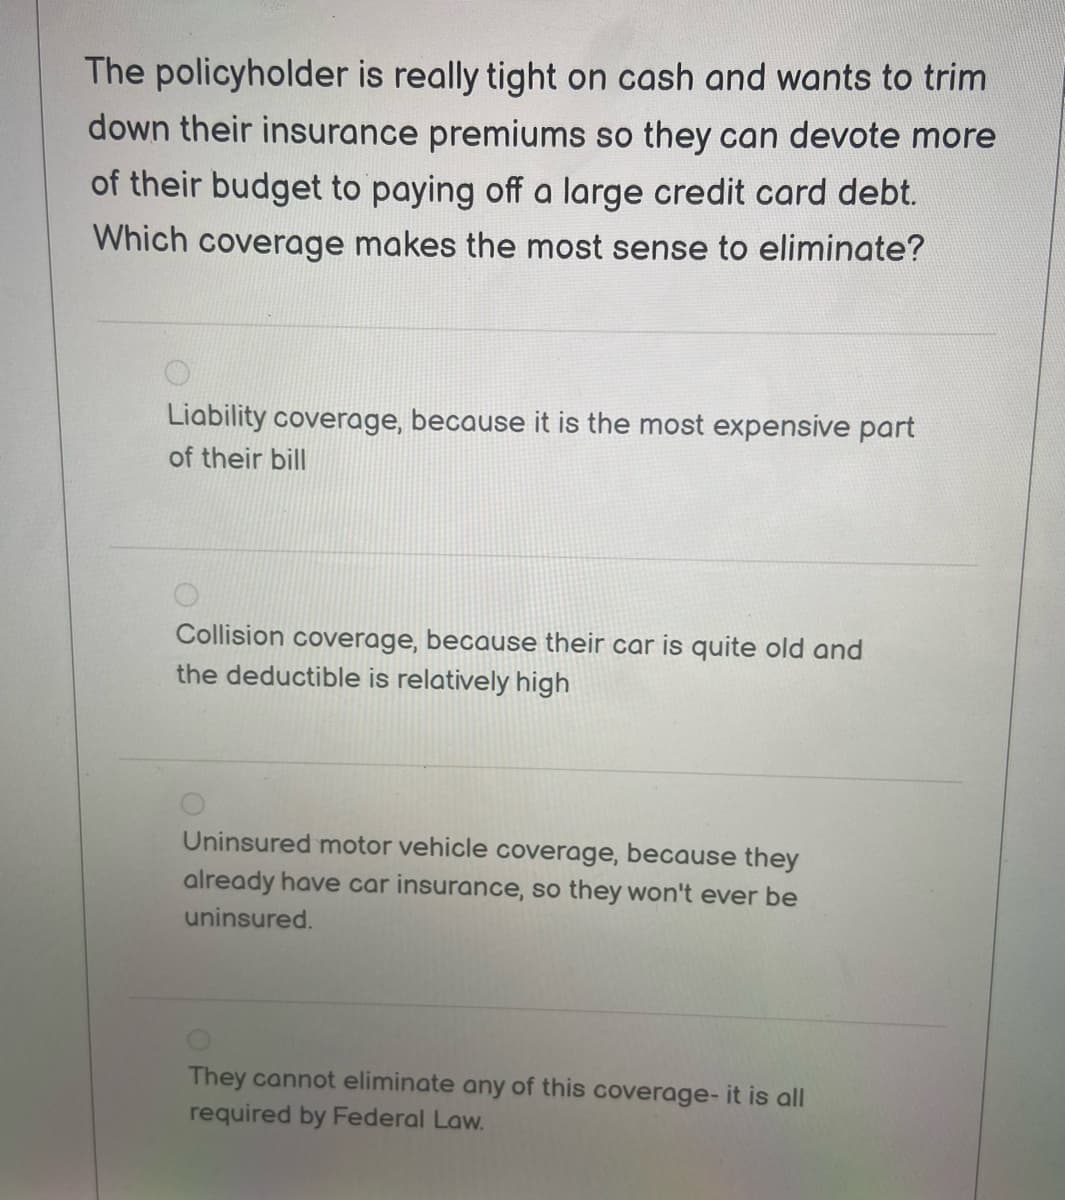 The policyholder is really tight on cash and wants to trim
down their insurance premiums so they can devote more
of their budget to paying off a large credit card debt.
Which coverage makes the most sense to eliminate?
Liability coverage, because it is the most expensive part
of their bill
Collision coverage, because their car is quite old and
the deductible is relatively high
Uninsured motor vehicle coverage, because they
already have car insurance, so they won't ever be
uninsured.
They cannot eliminate any of this coverage- it is all
required by Federal Law.